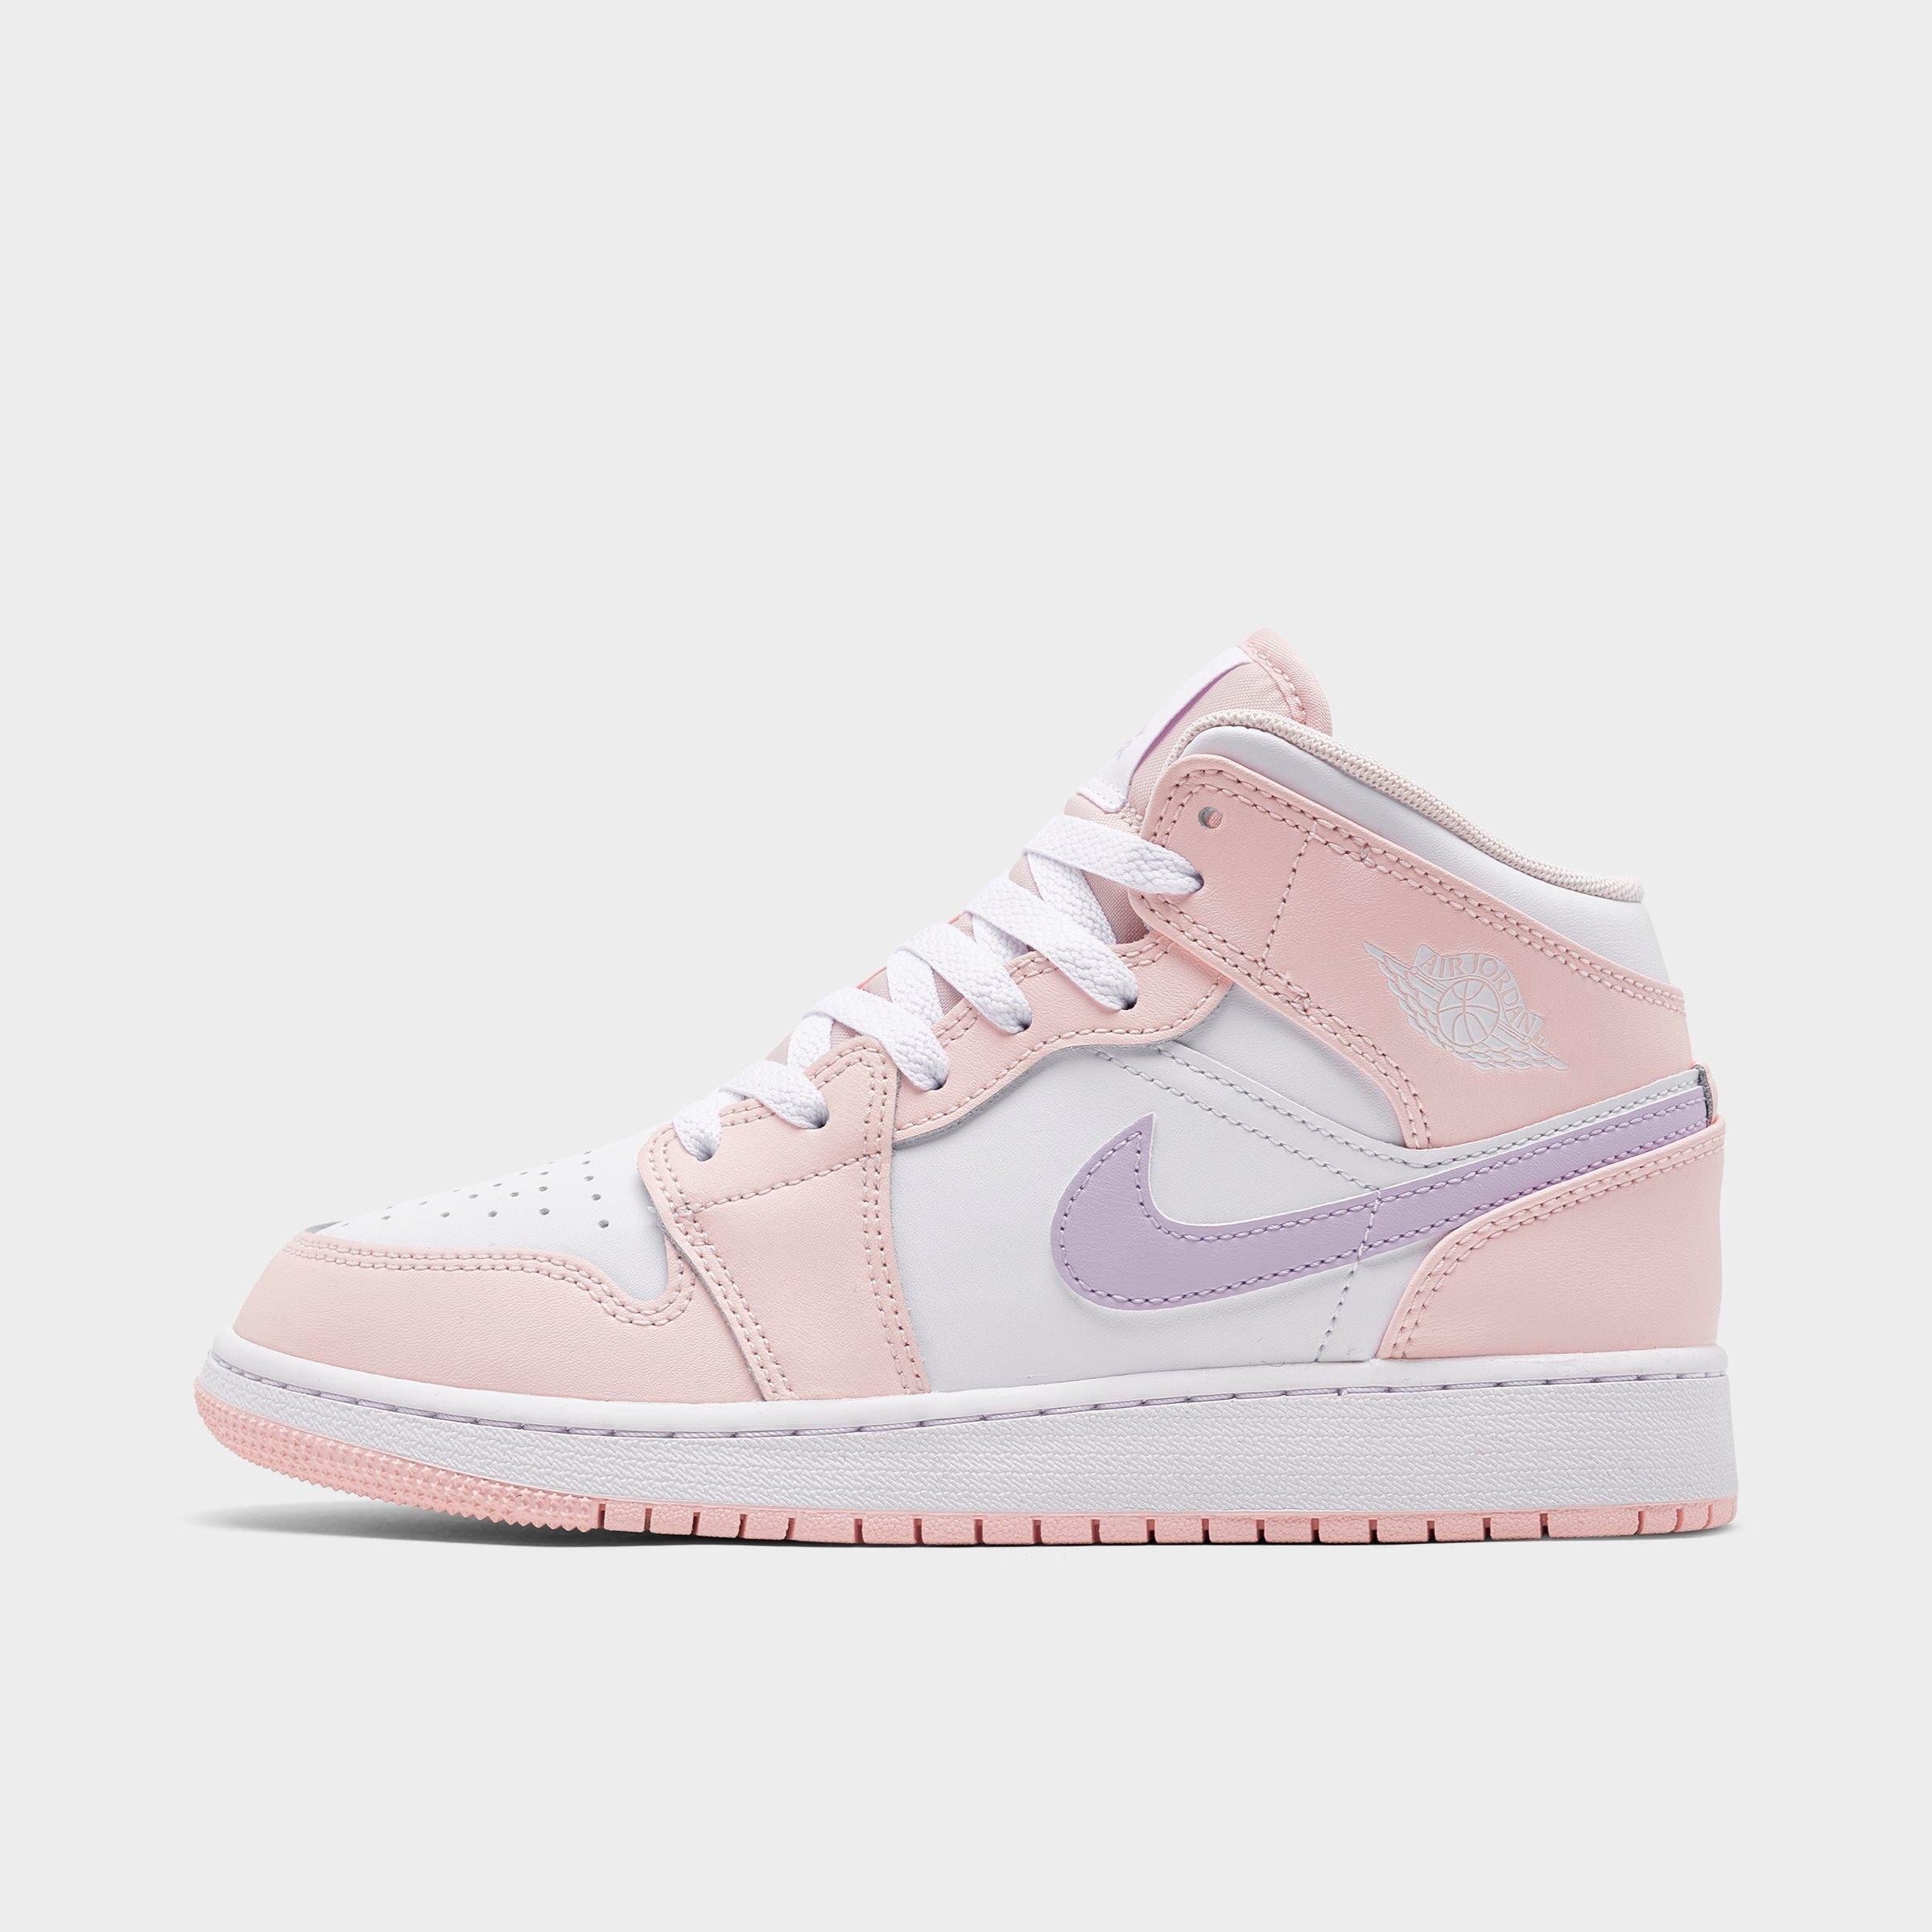 Nike Girls' Big Kids' Air Jordan Retro 1 Mid Casual Shoes In Pink Frost/violet Wash/white